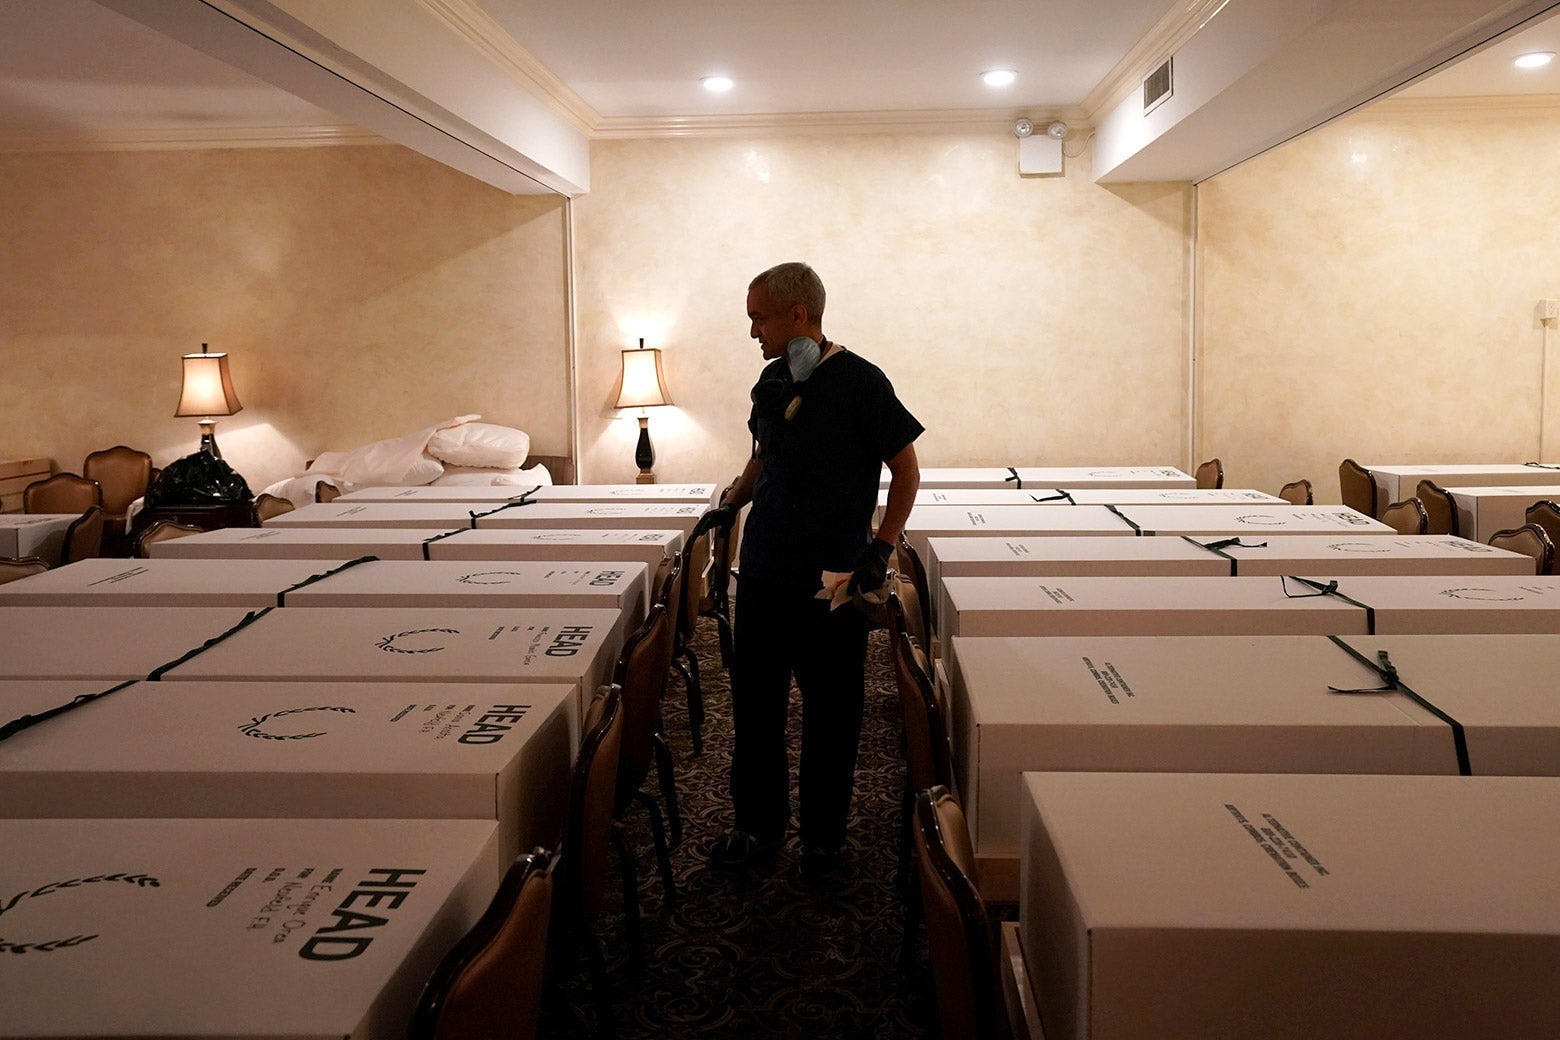 Funeral Director Omar Rodriguez looks over caskets of bodies at the Gerard J. Neufeld funeral home during the outbreak of the coronavirus disease (COVID-19) in Queens, New York on April 26.